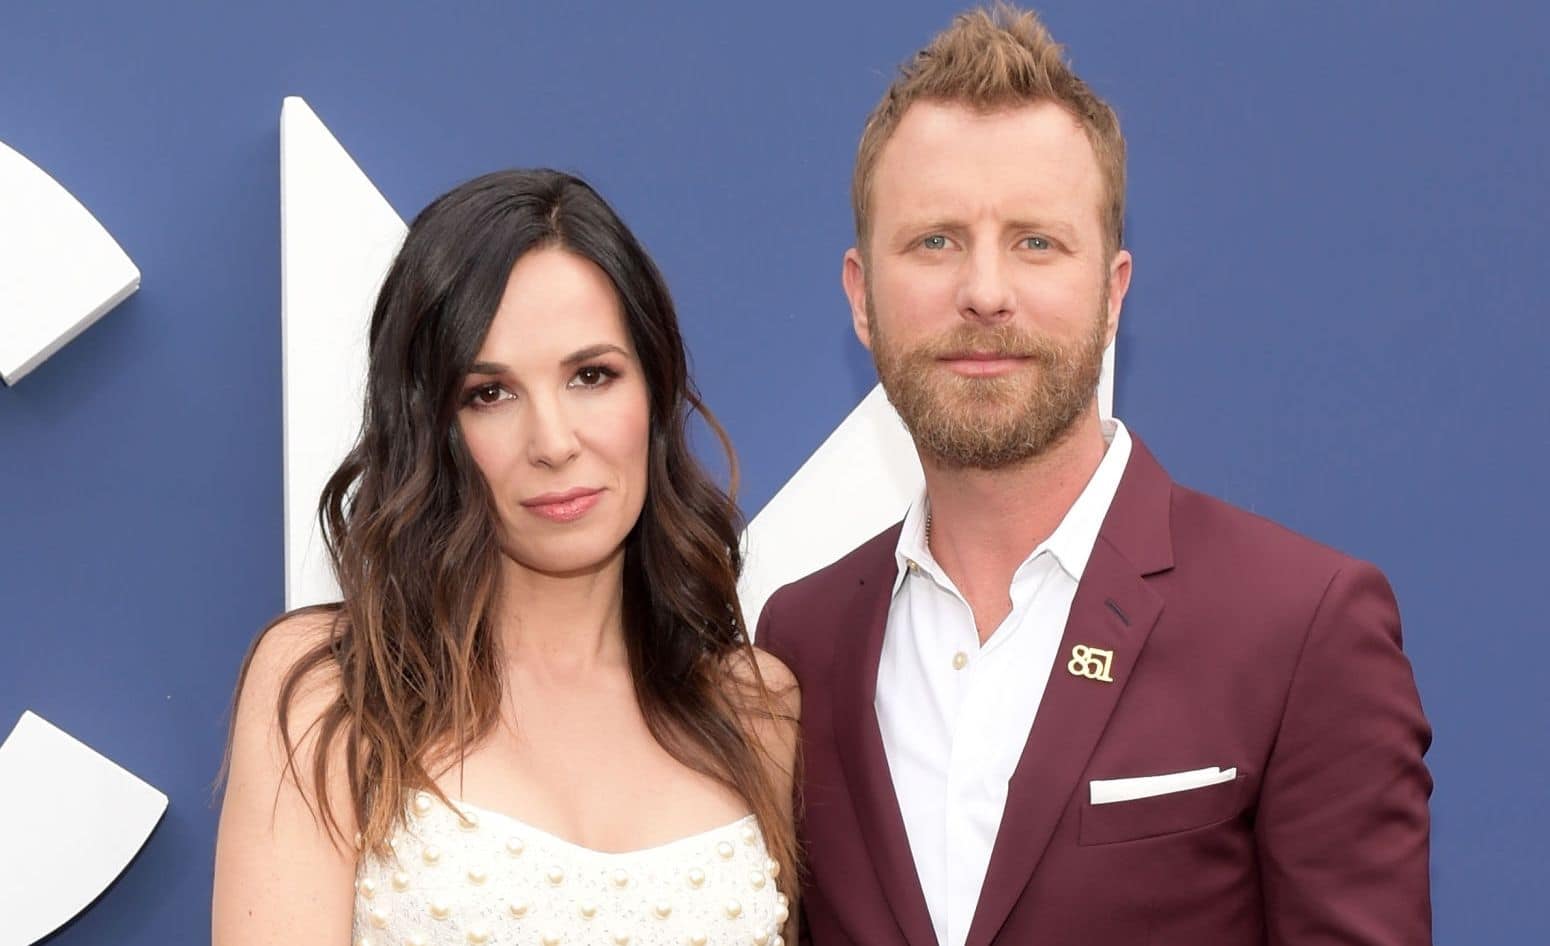 The Story of How Dierks Bentley and His Wife Met Is More Romantic Than Any Country Song